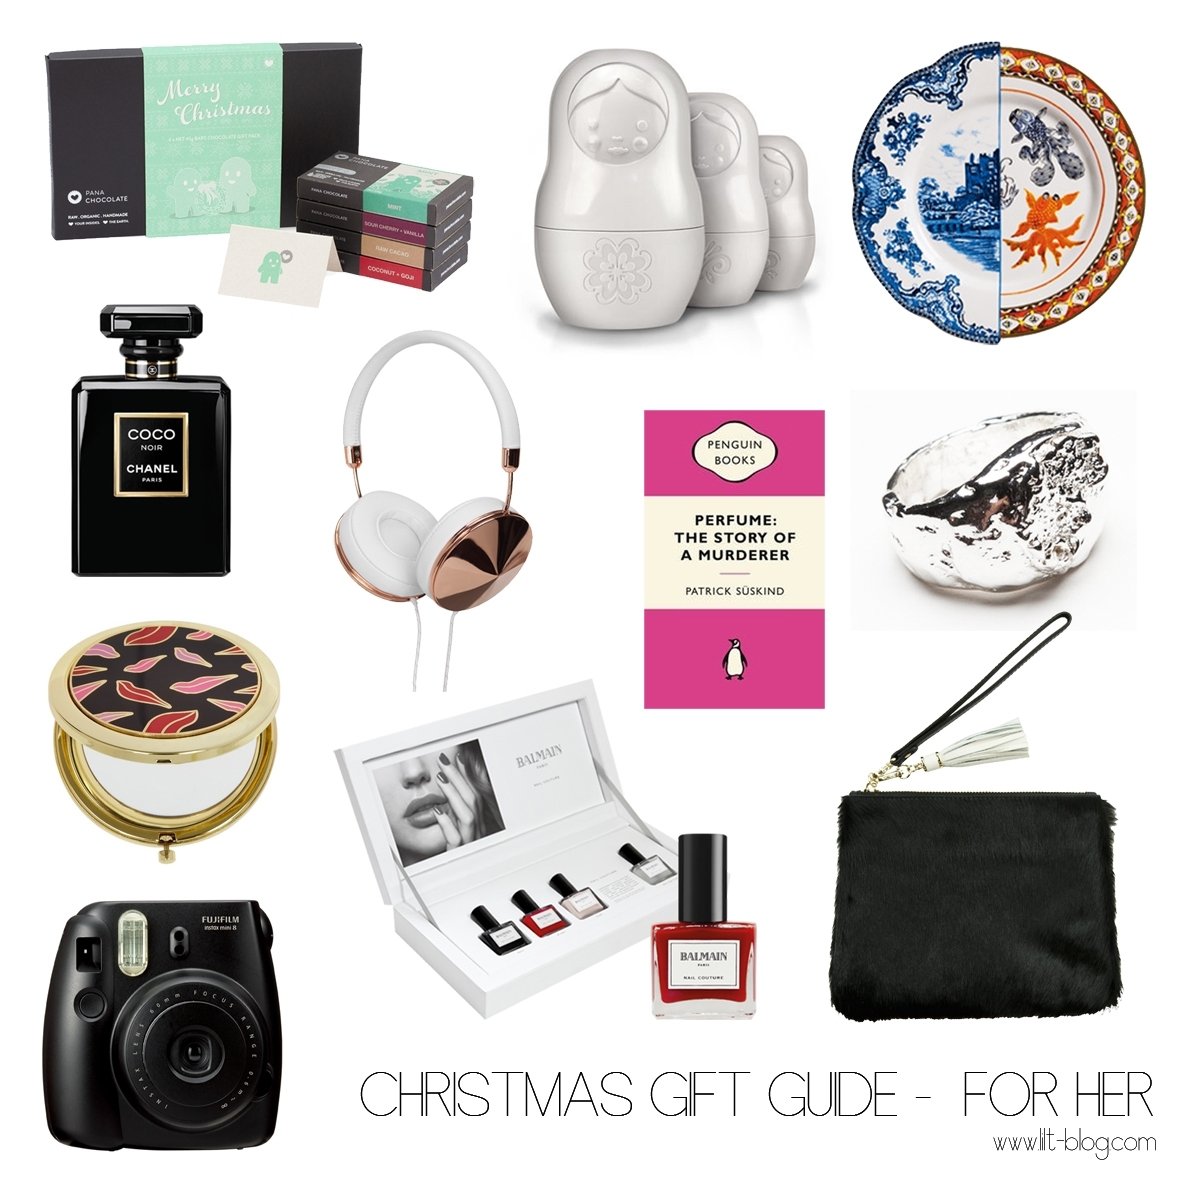 10 Gorgeous Best Christmas Gift Ideas 2013 christmas gift guide for her 2022